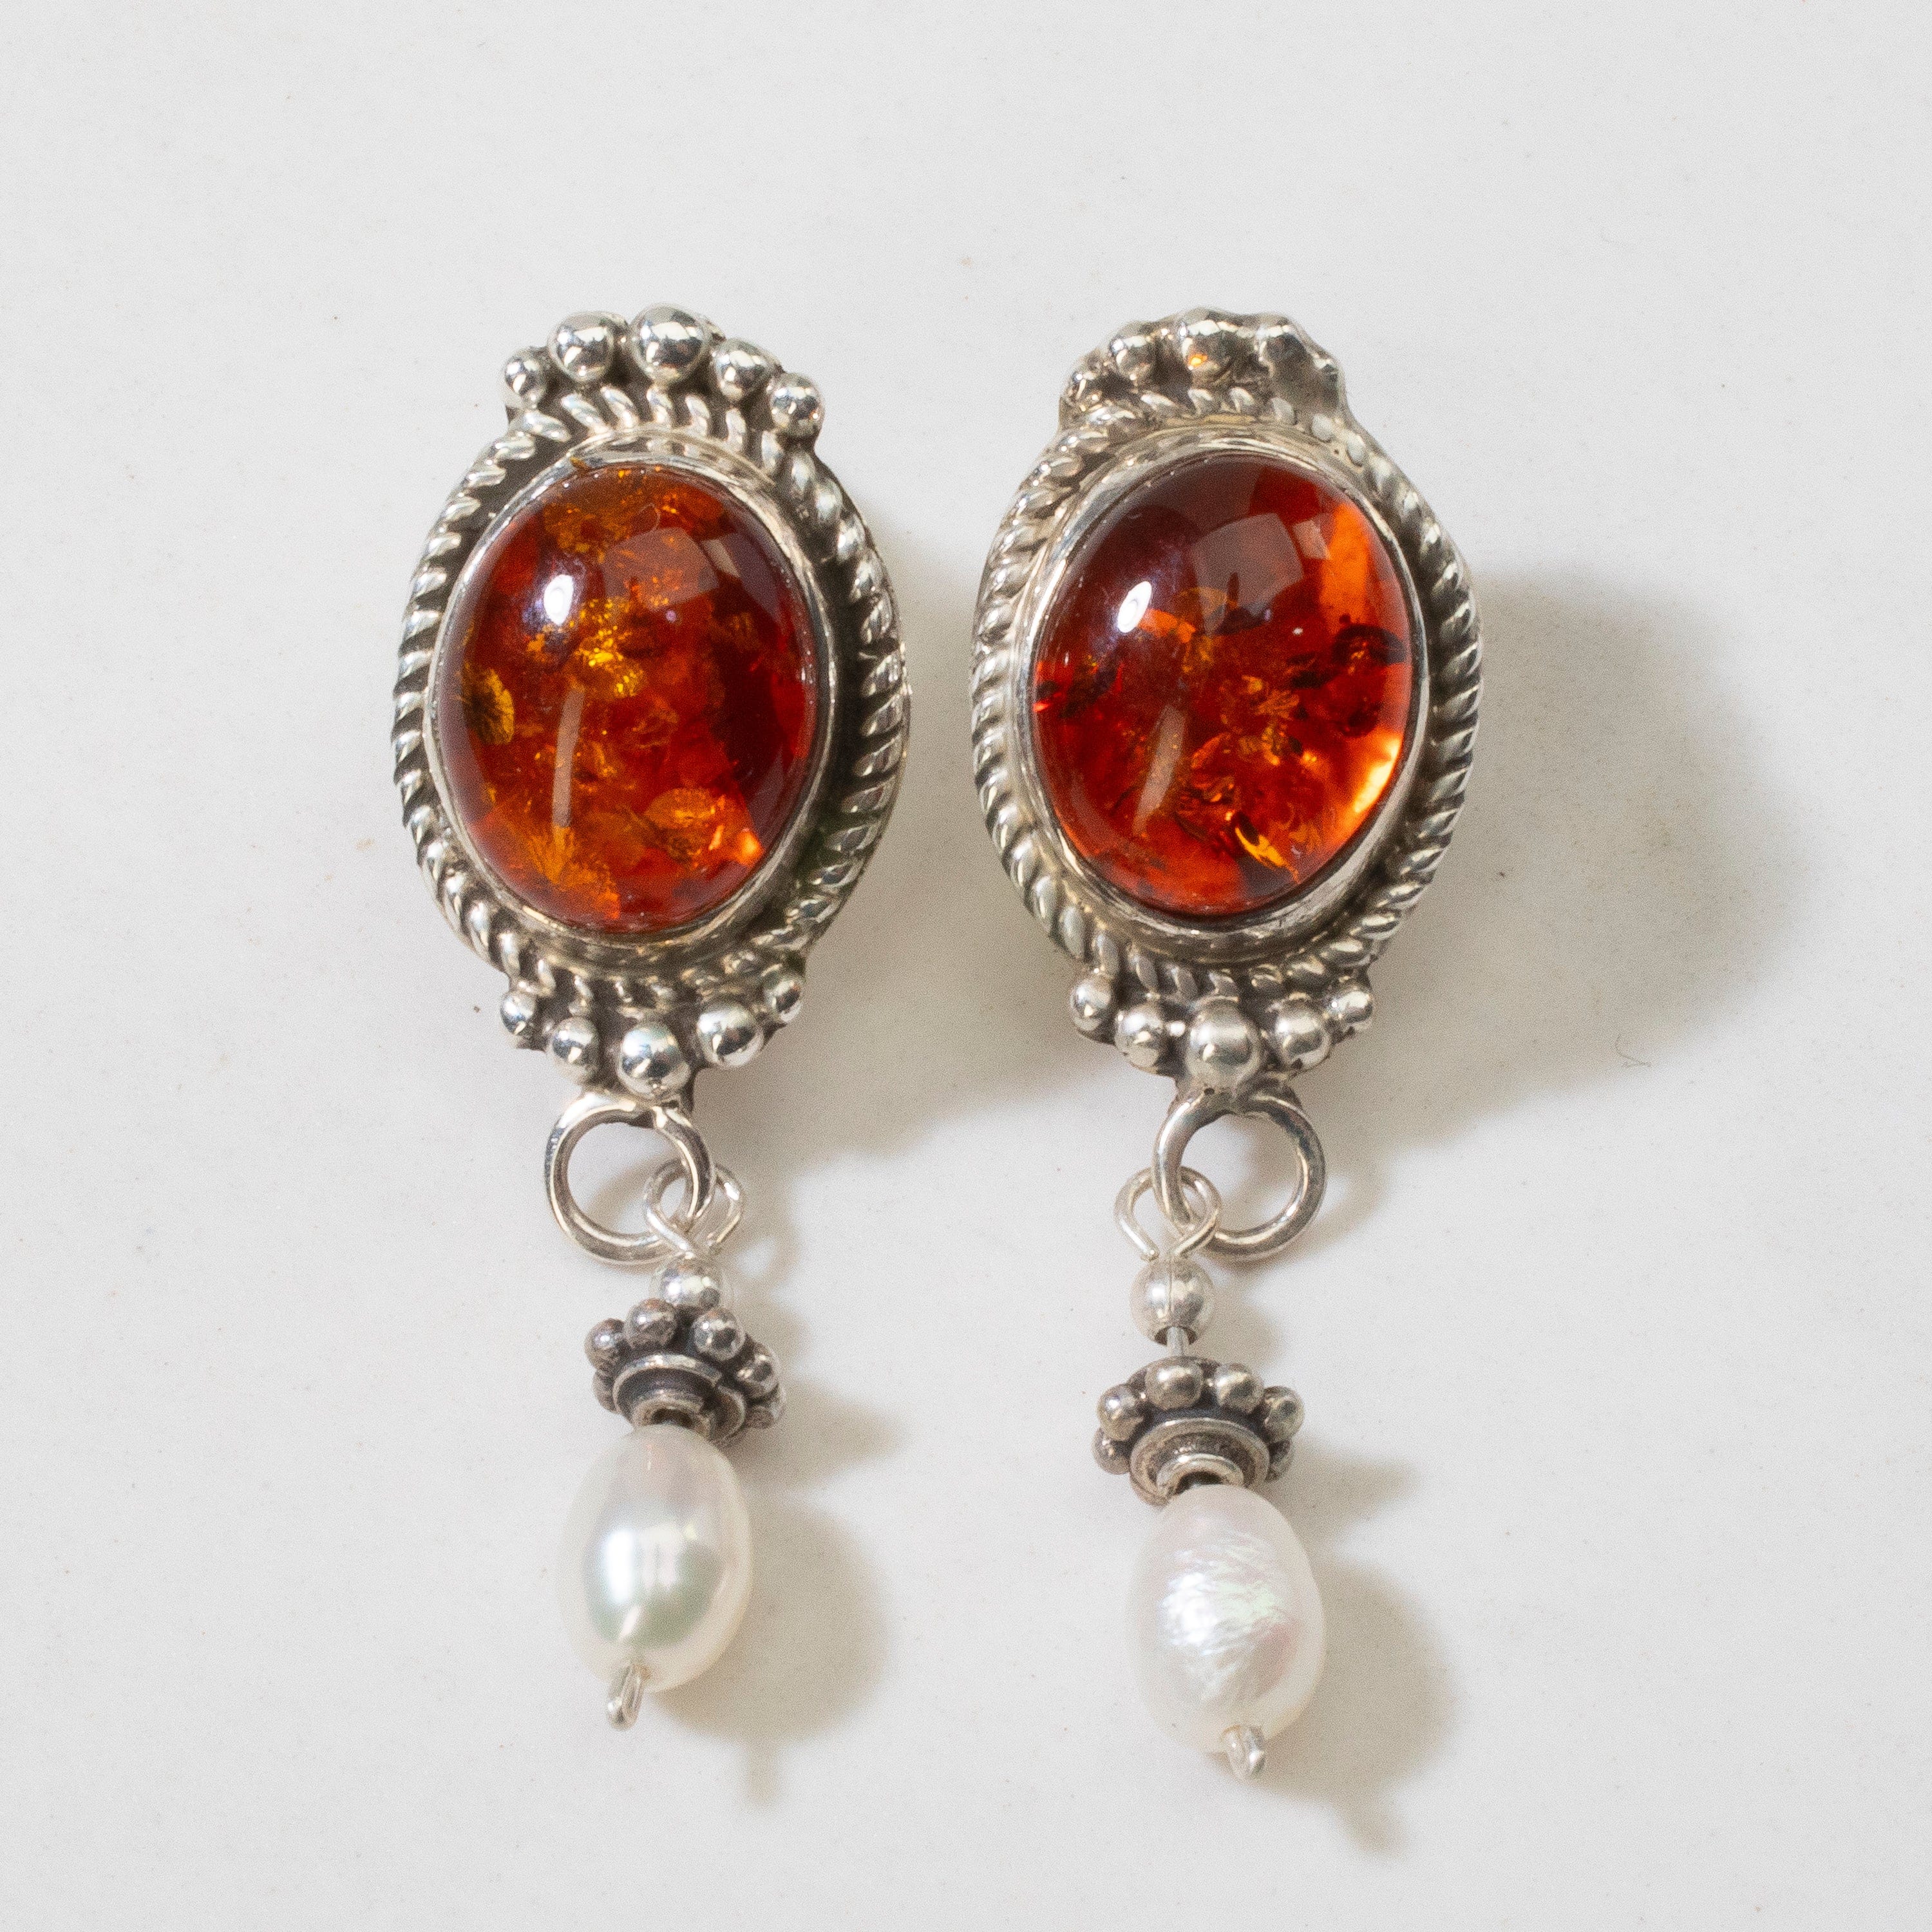 Kalifano Native American Jewelry Baltic Amber & Freshwater Pearl Navajo USA Native American Made 925 Sterling Silver Earrings with Stud Backing NAE250.008